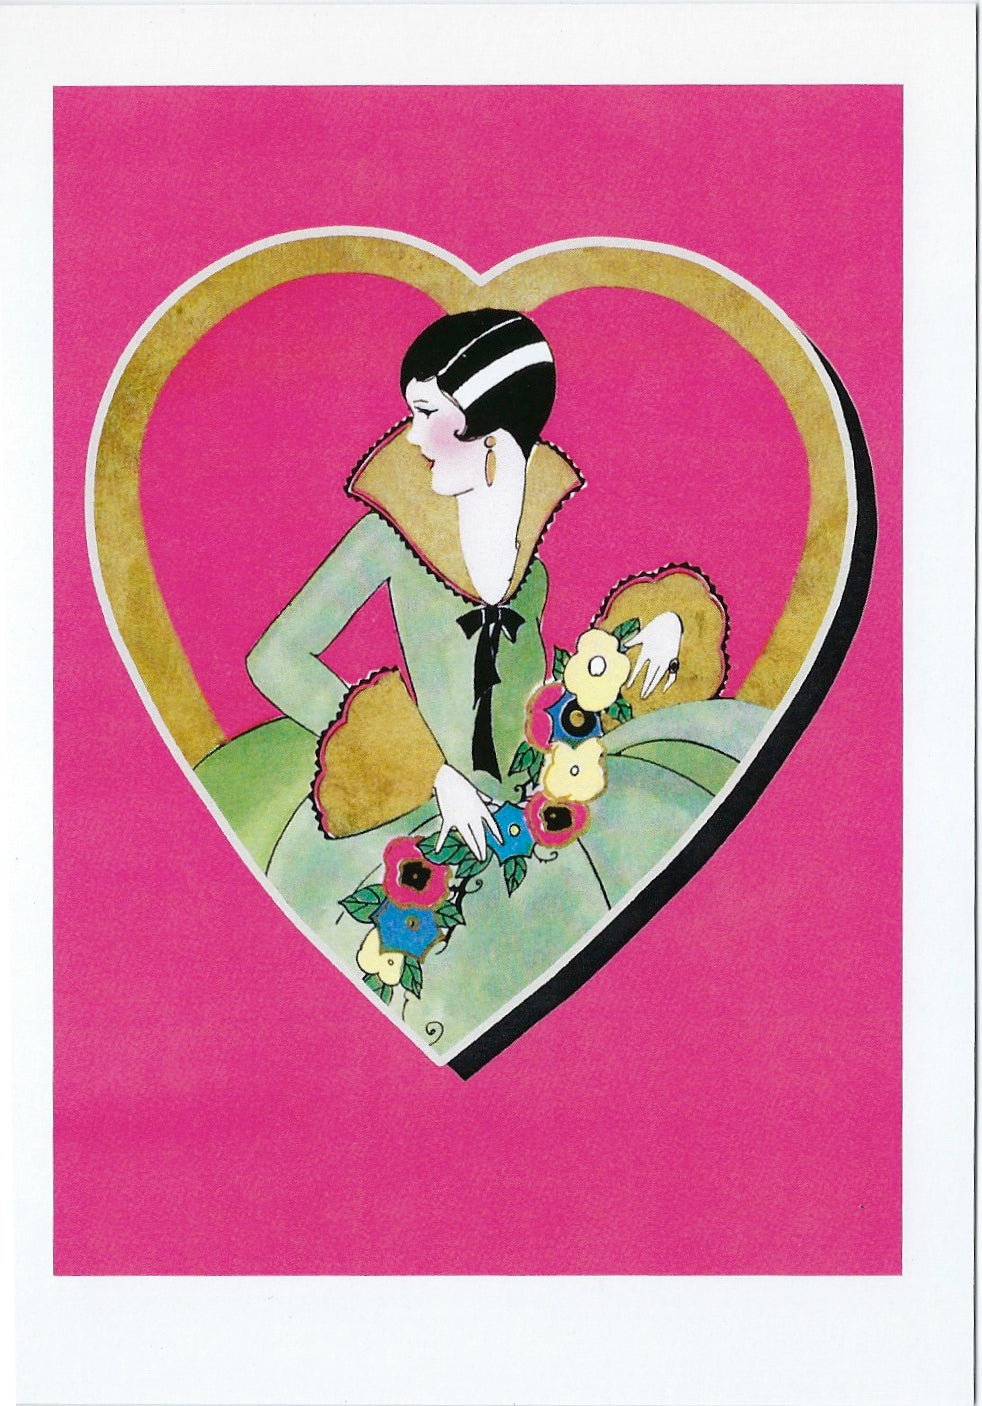 All Occasion Greeting Card -Art Deco Woman in Heart